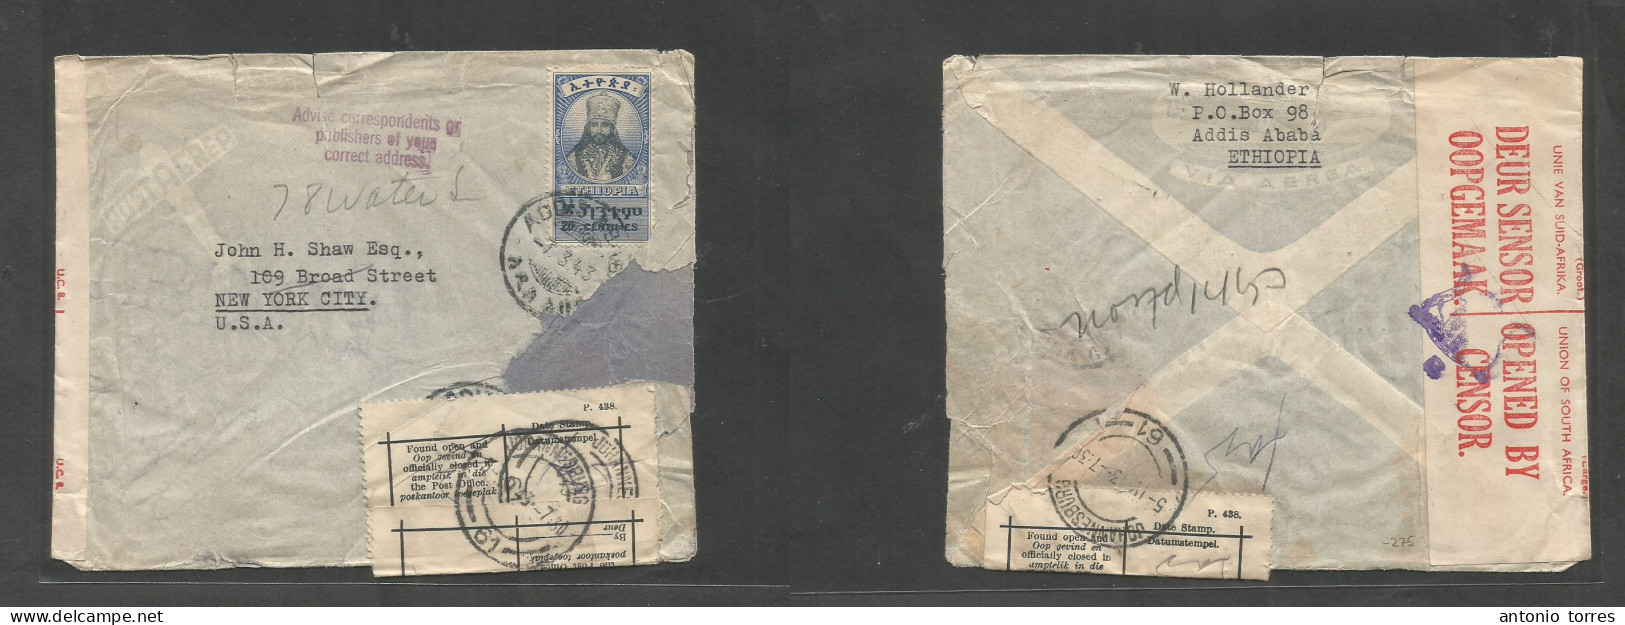 Ethiopia. 1943 (7 March) Addis Abeba - USA, NYC. Fkd Env 20c Rate + S. Africa Censor + Post Office Official Label Tied A - Ethiopië